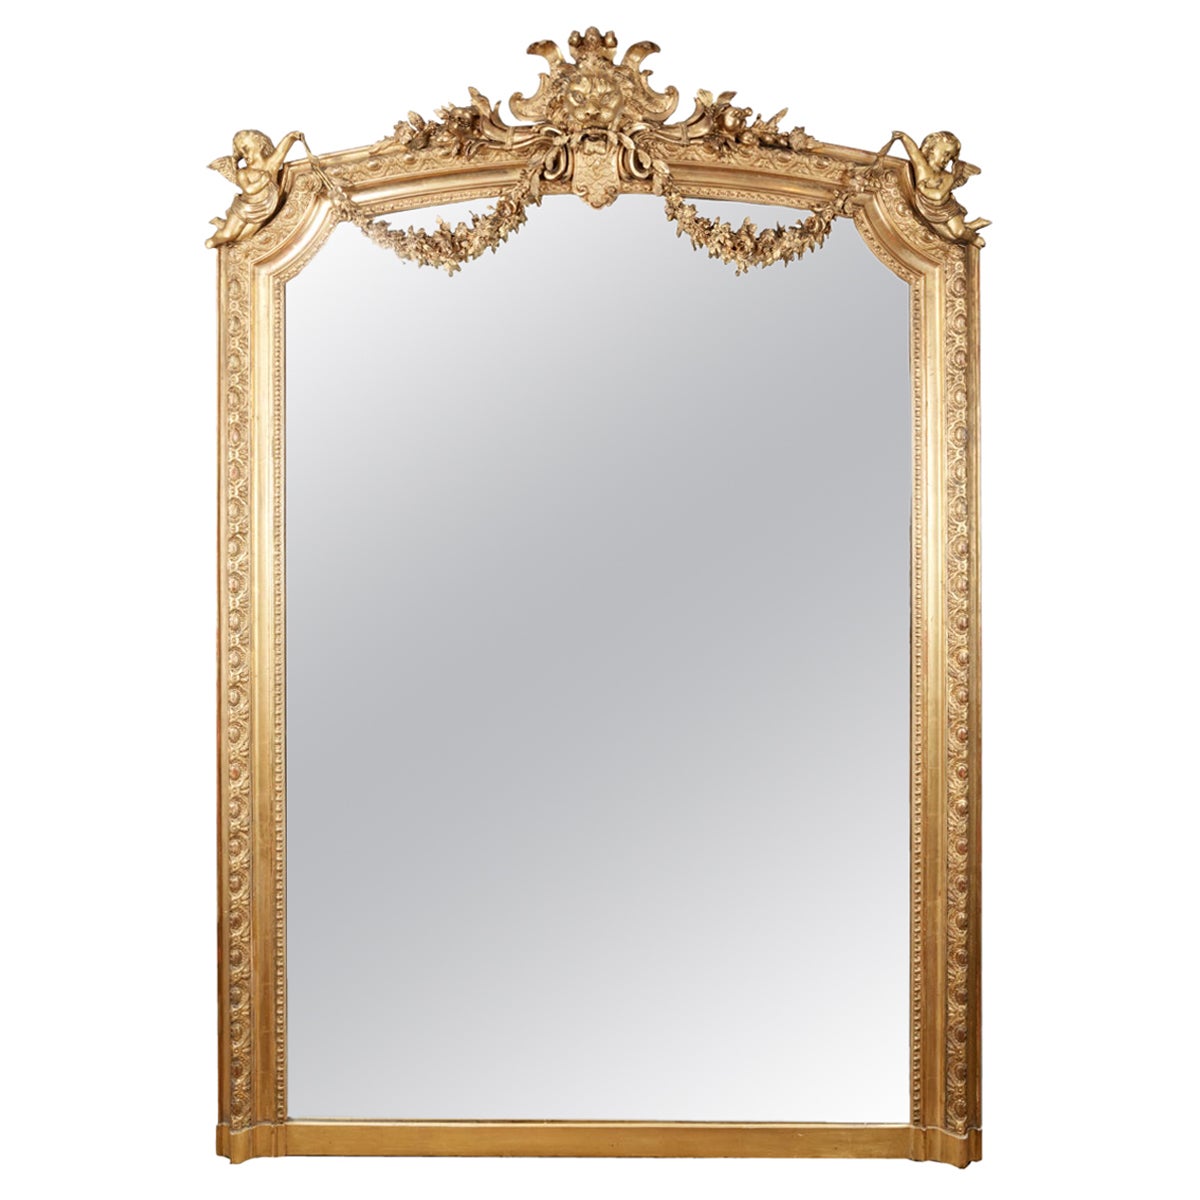 Early 19th Century Gilt Overmantel Mirror After William Kent For Sale